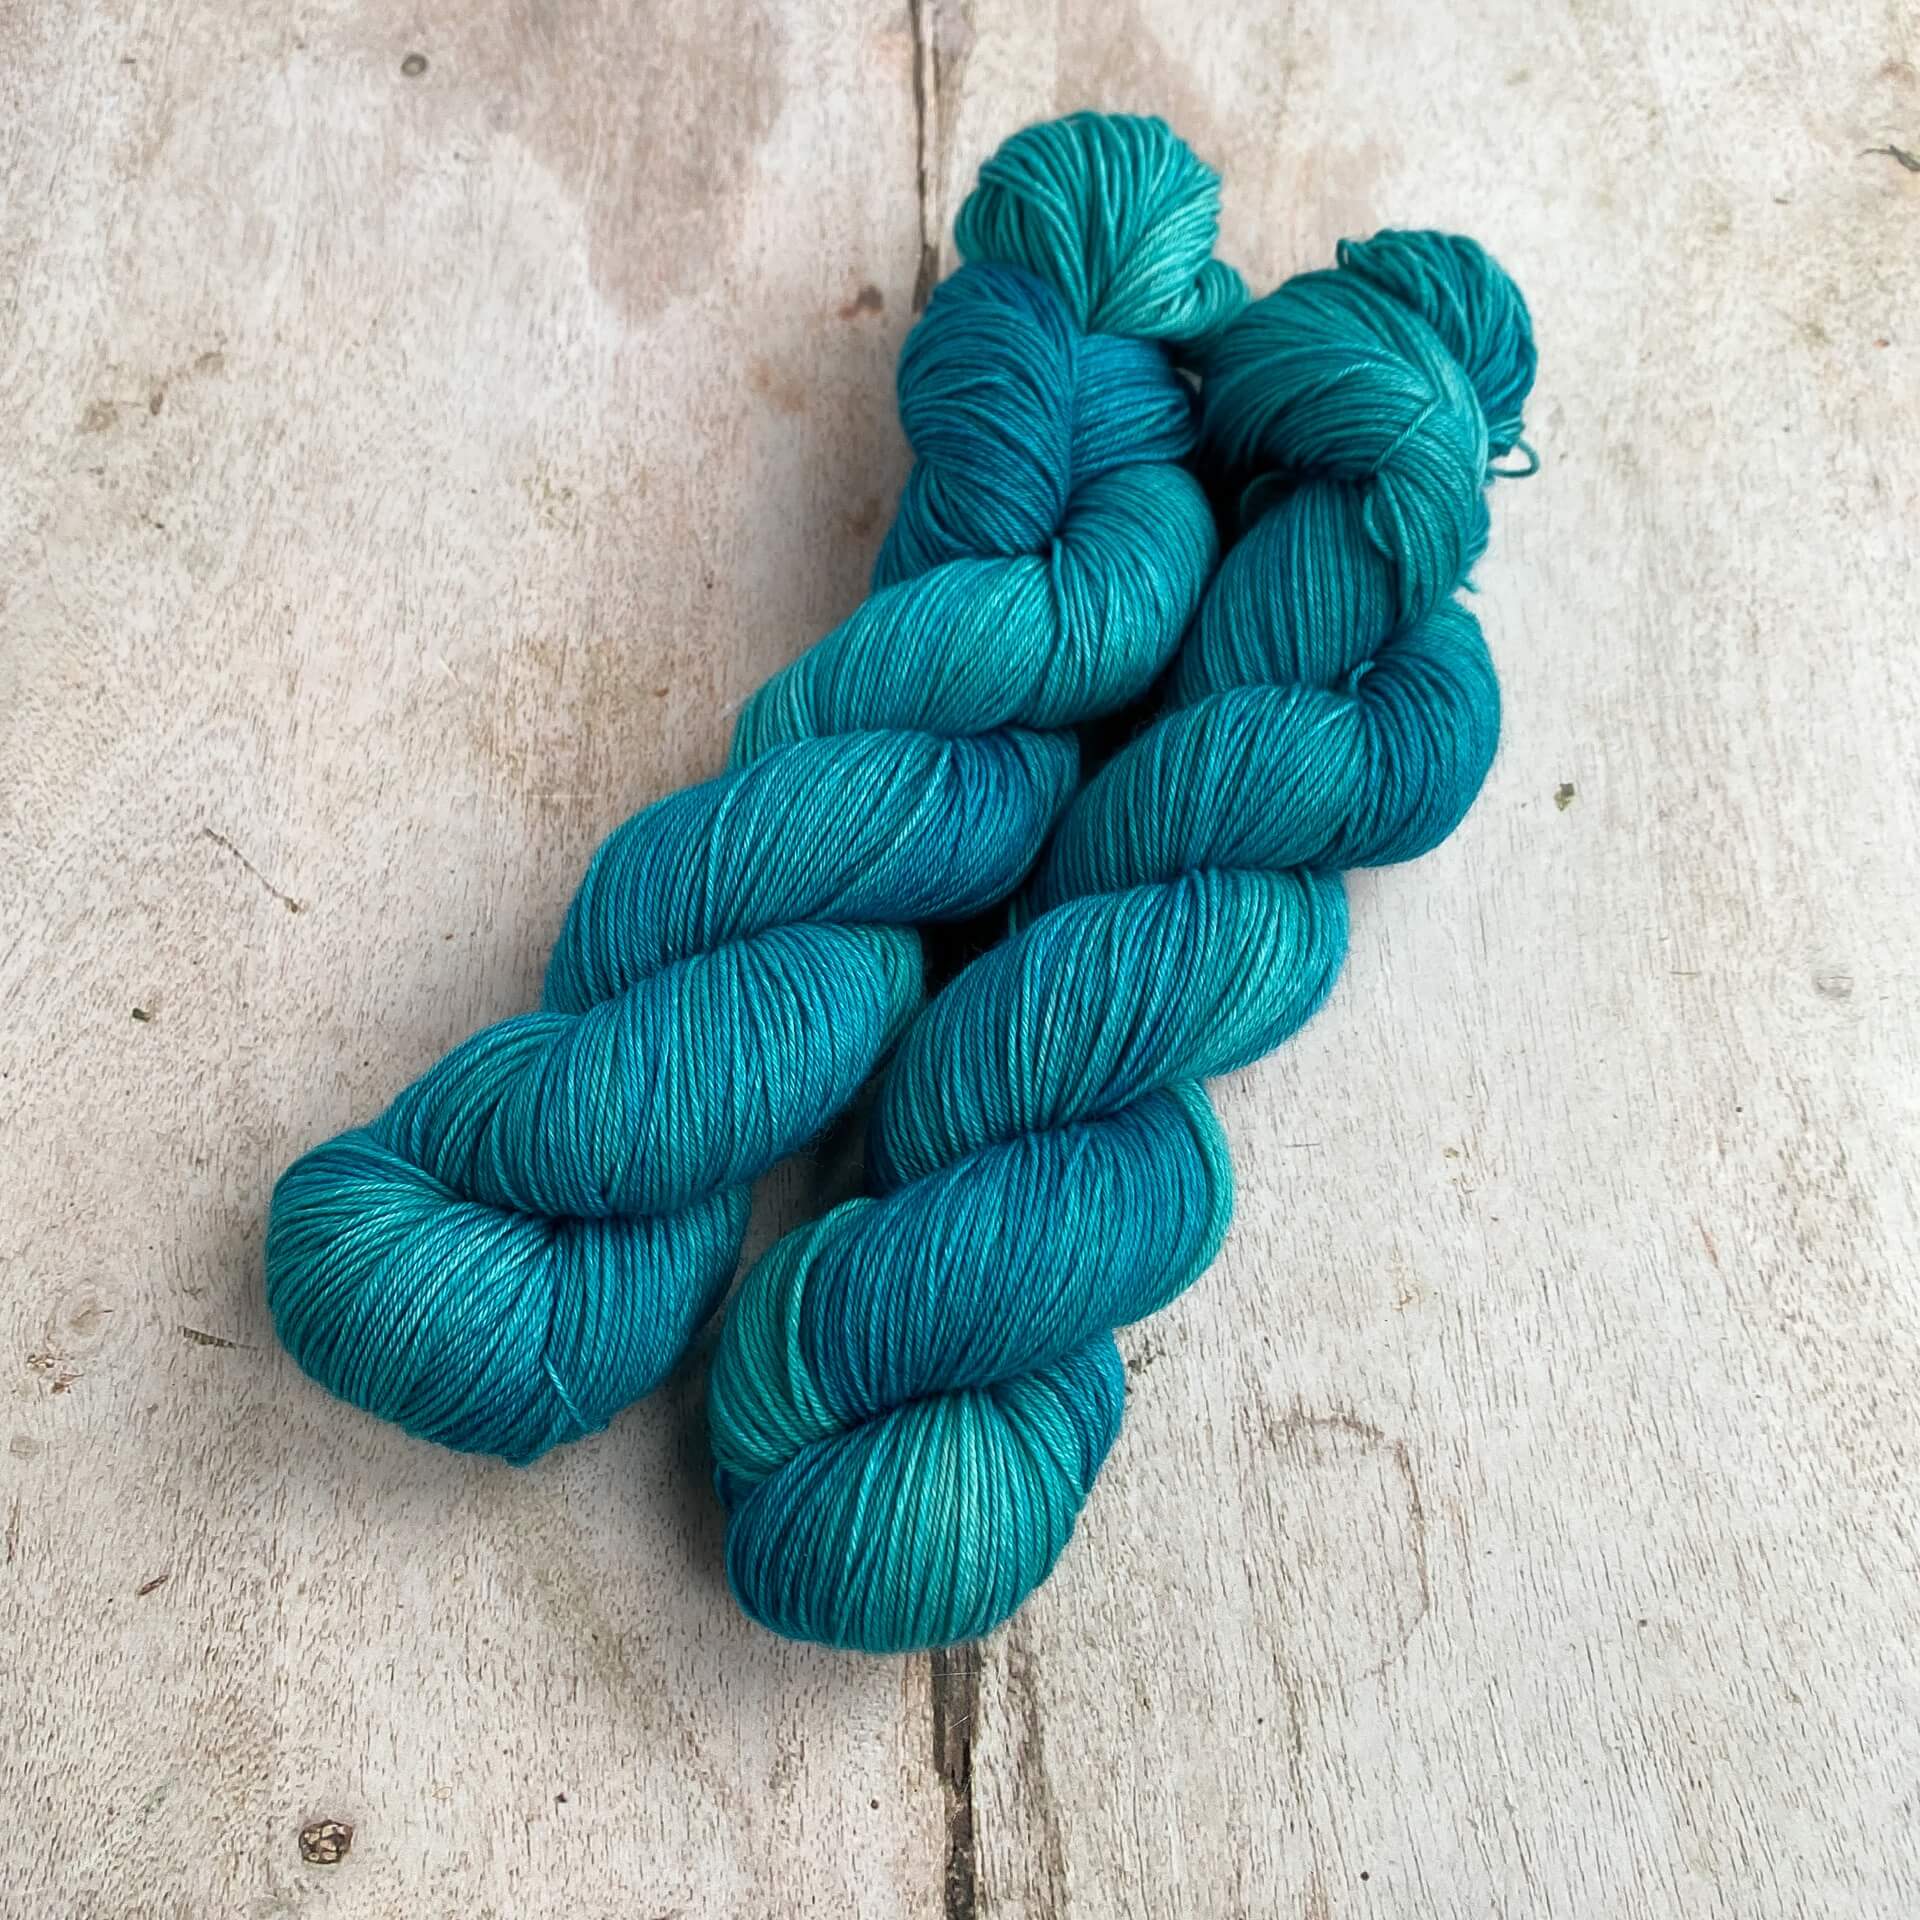 Two skeins of a tonal teal blue yarn sit together on a wooden table. 